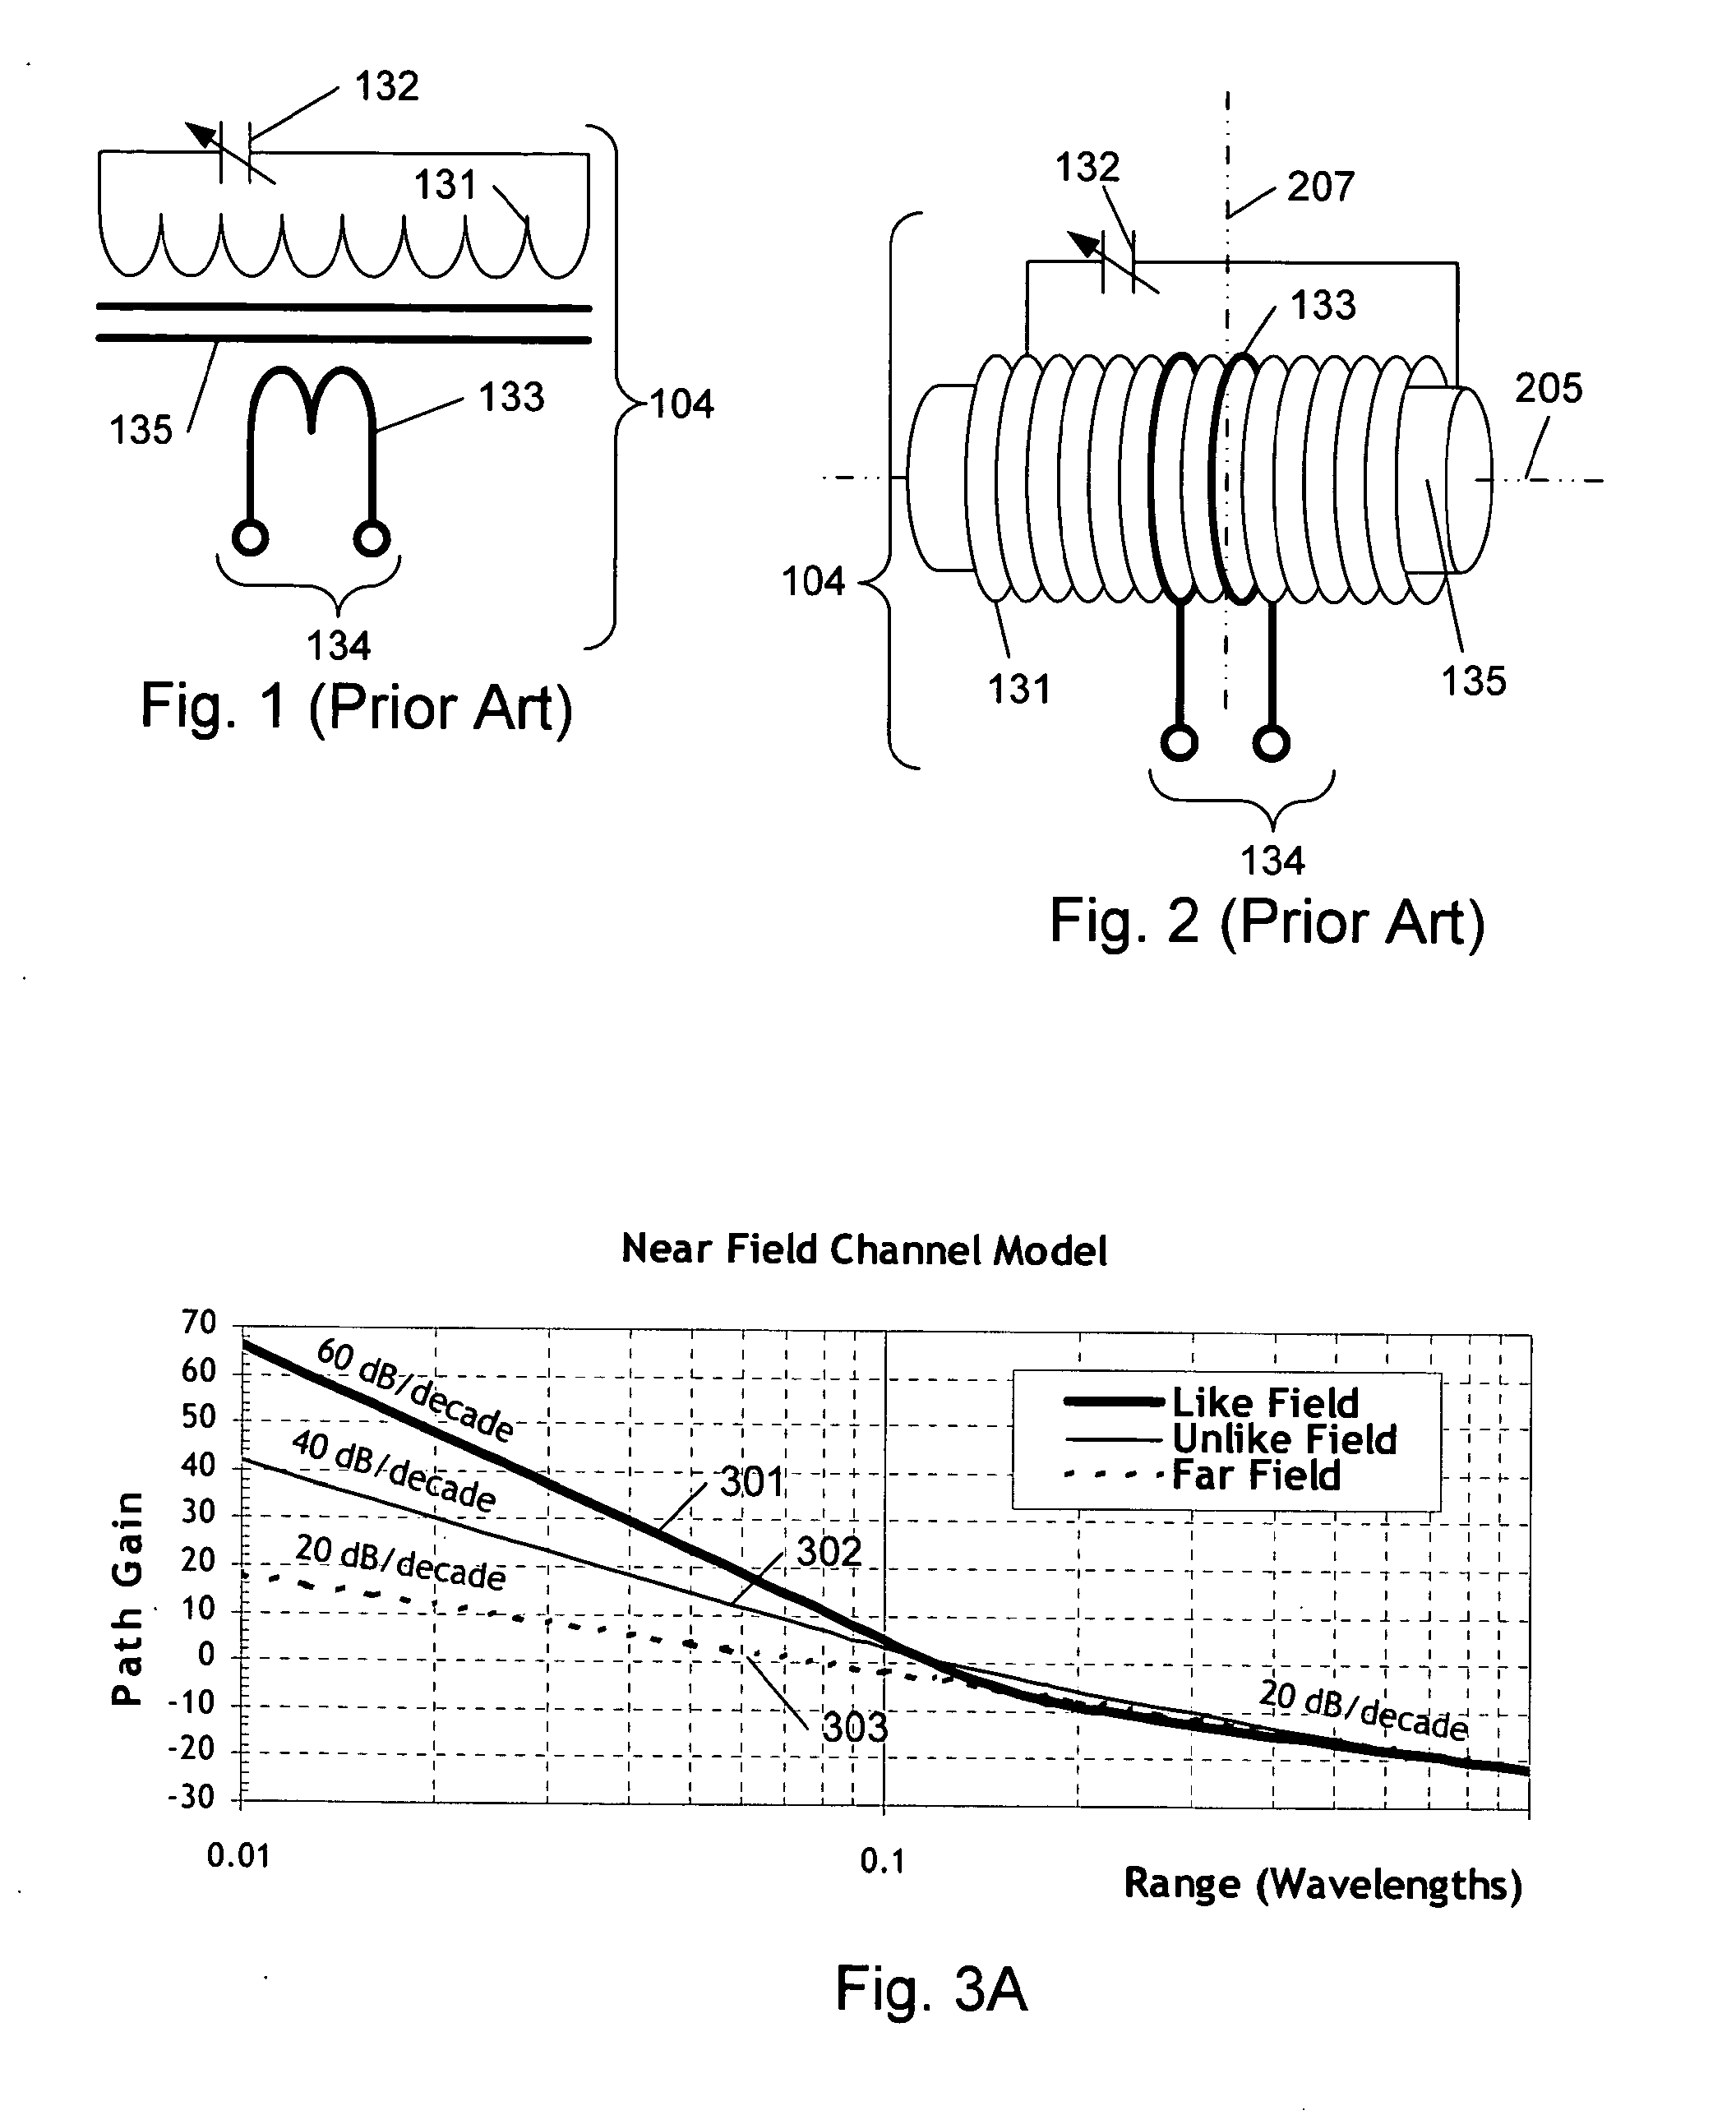 Embedded Symmetric Multiple Axis Antenna System With Isolation Among The Multiple Axes